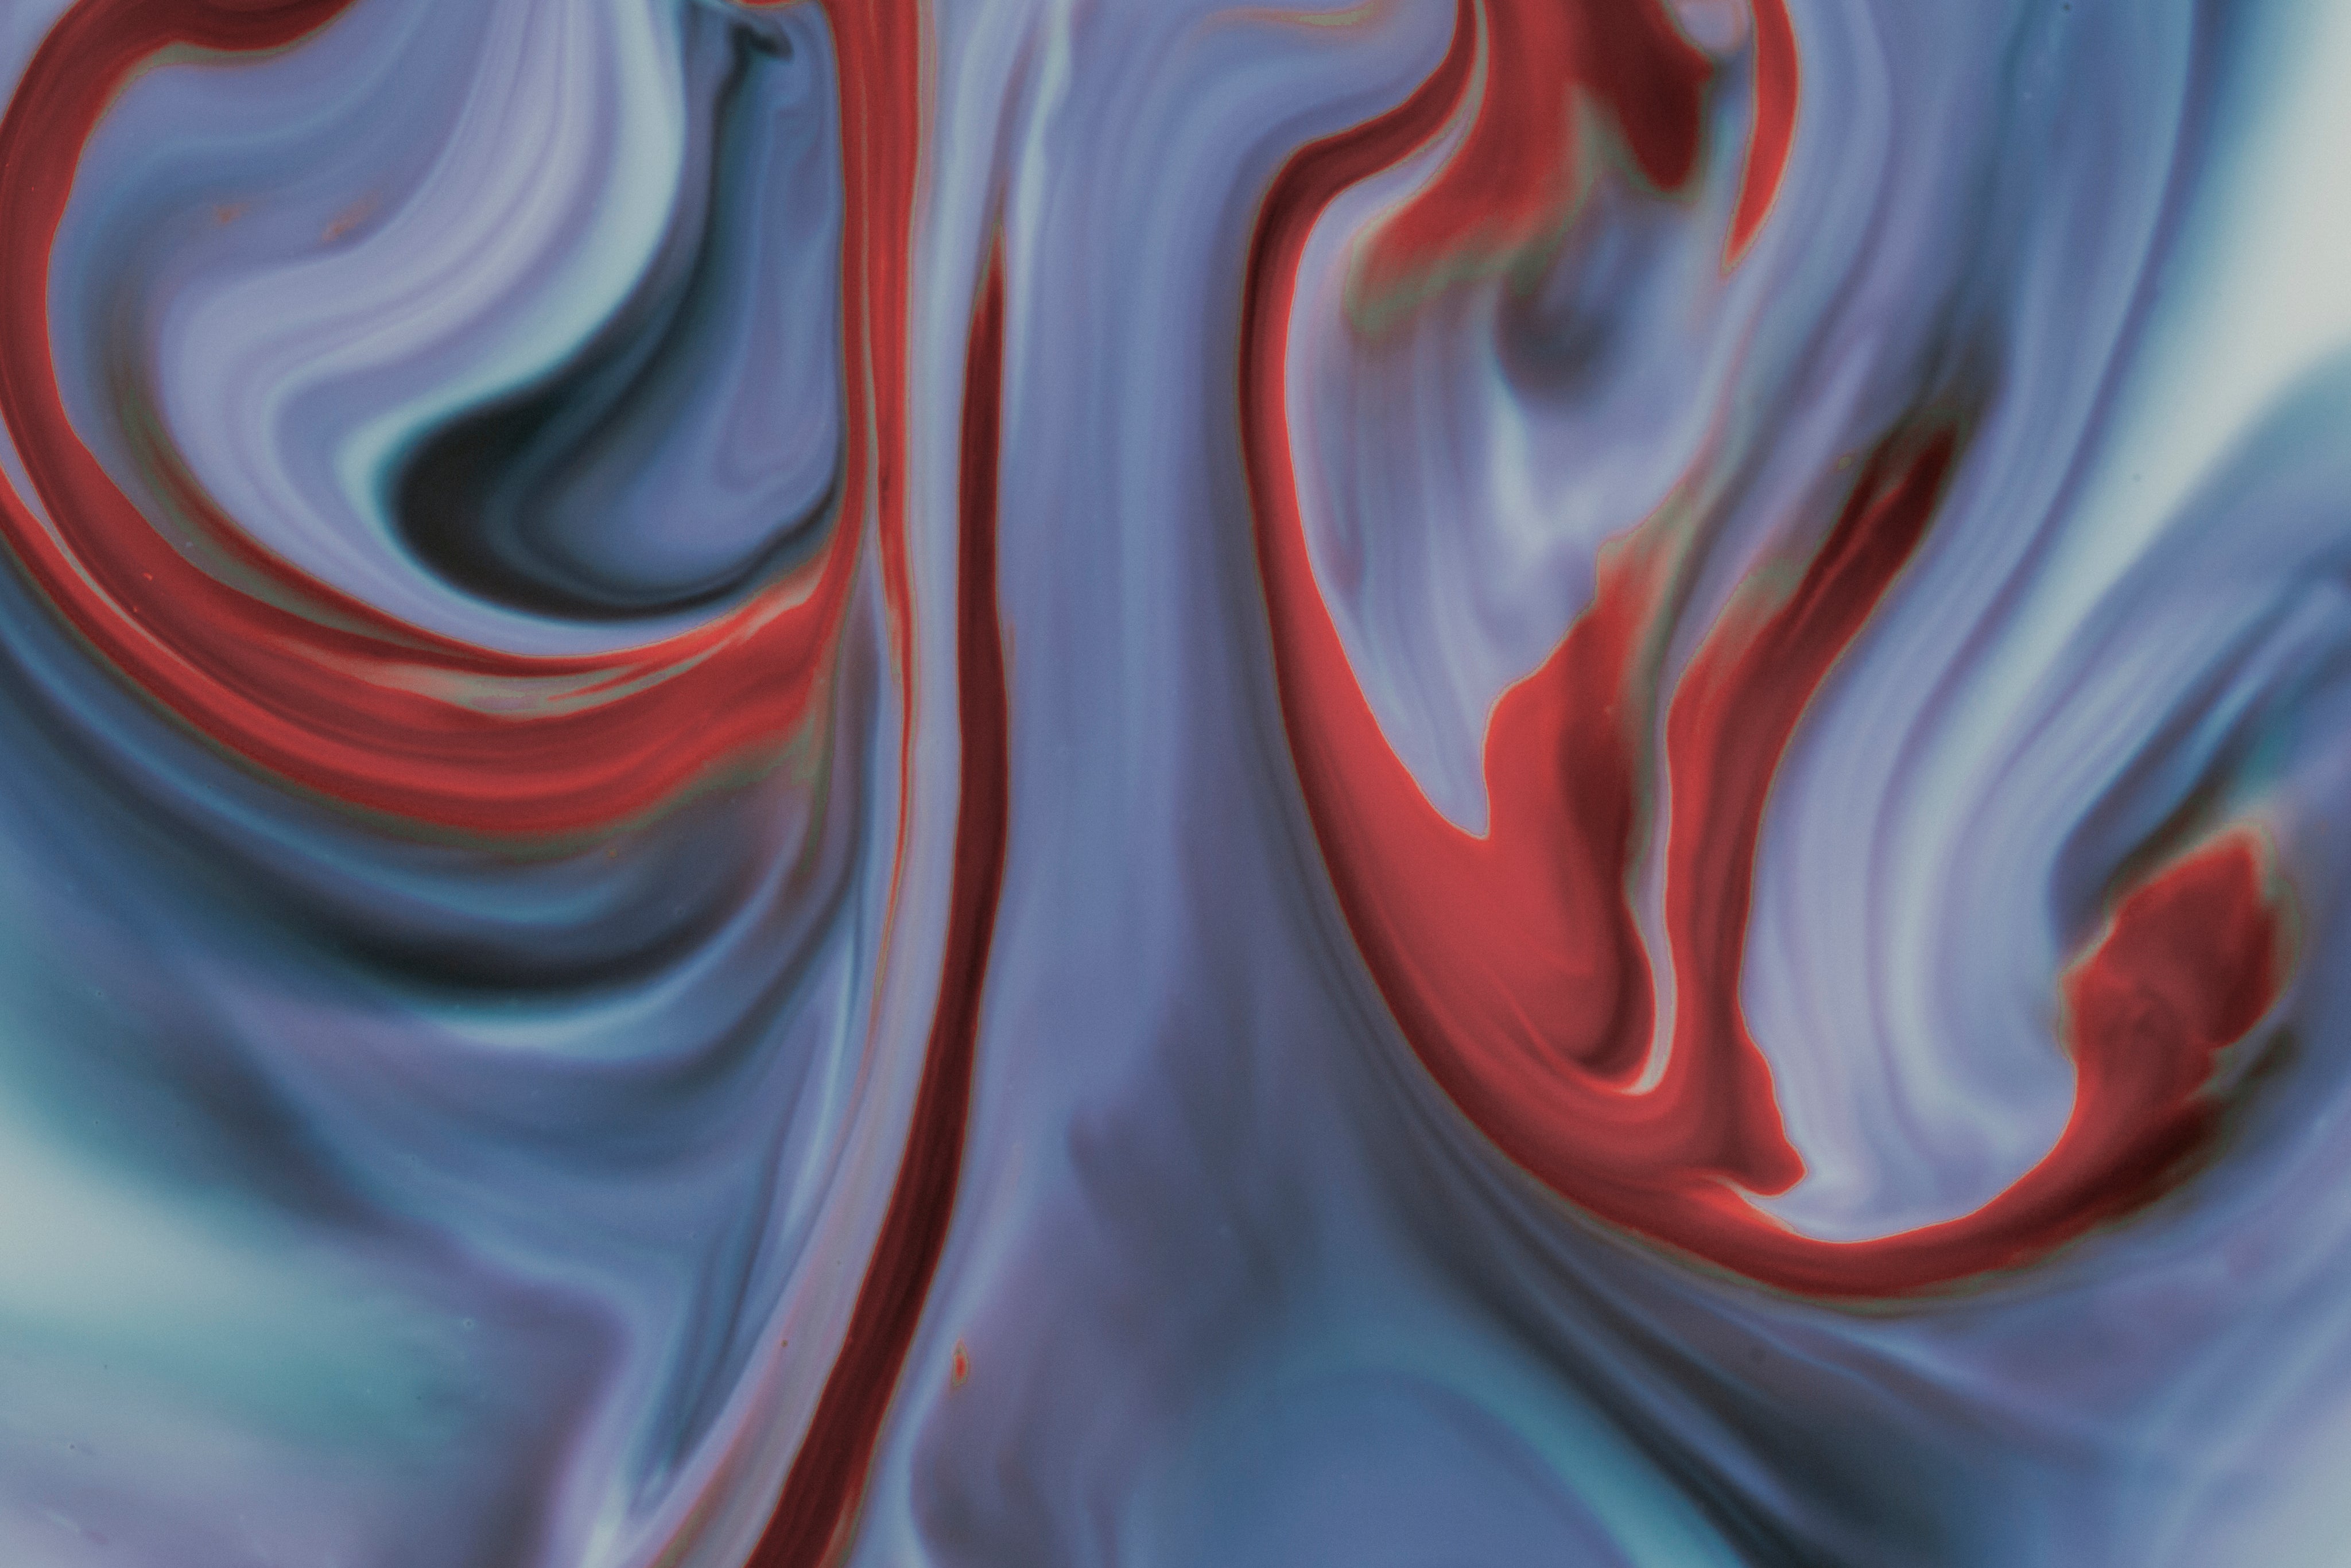 purple-and-red-marbling-abstract-view.jpg